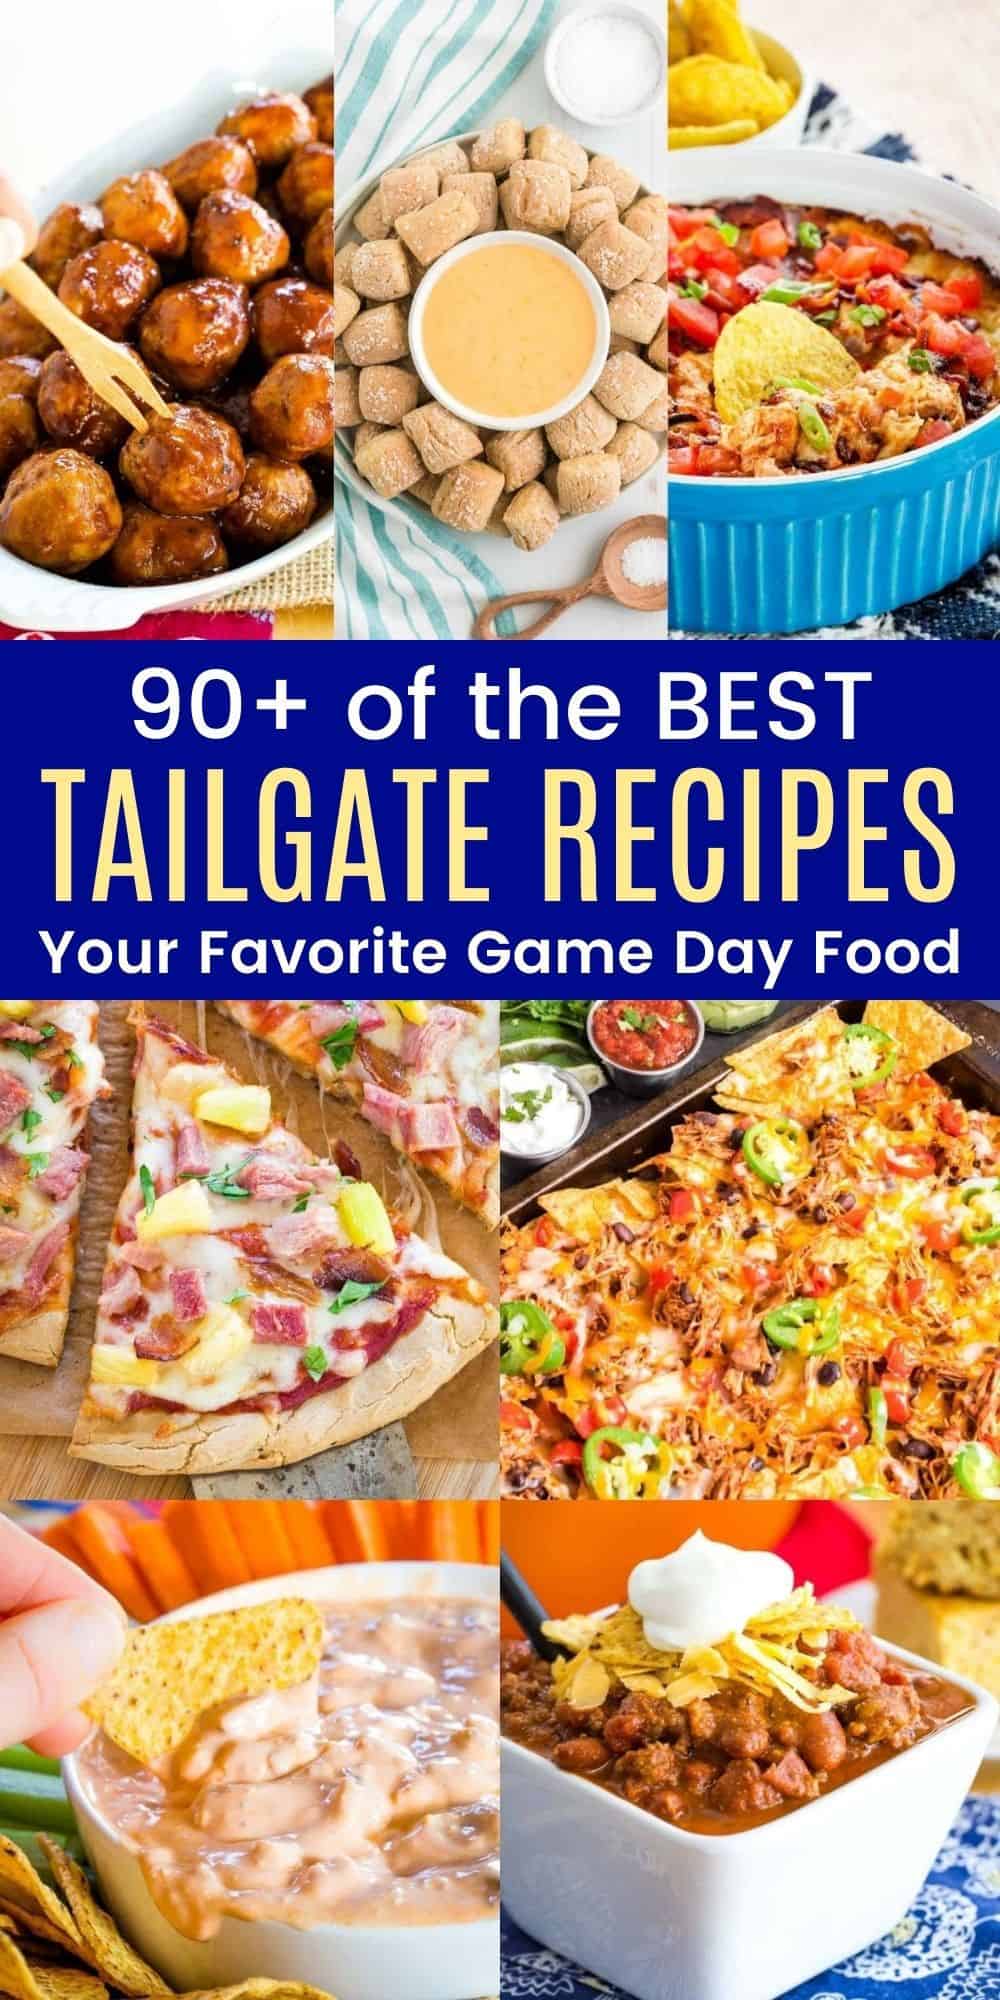 90+ Tailgate Food Recipes for Game Day! | Cupcakes & Kale Chips